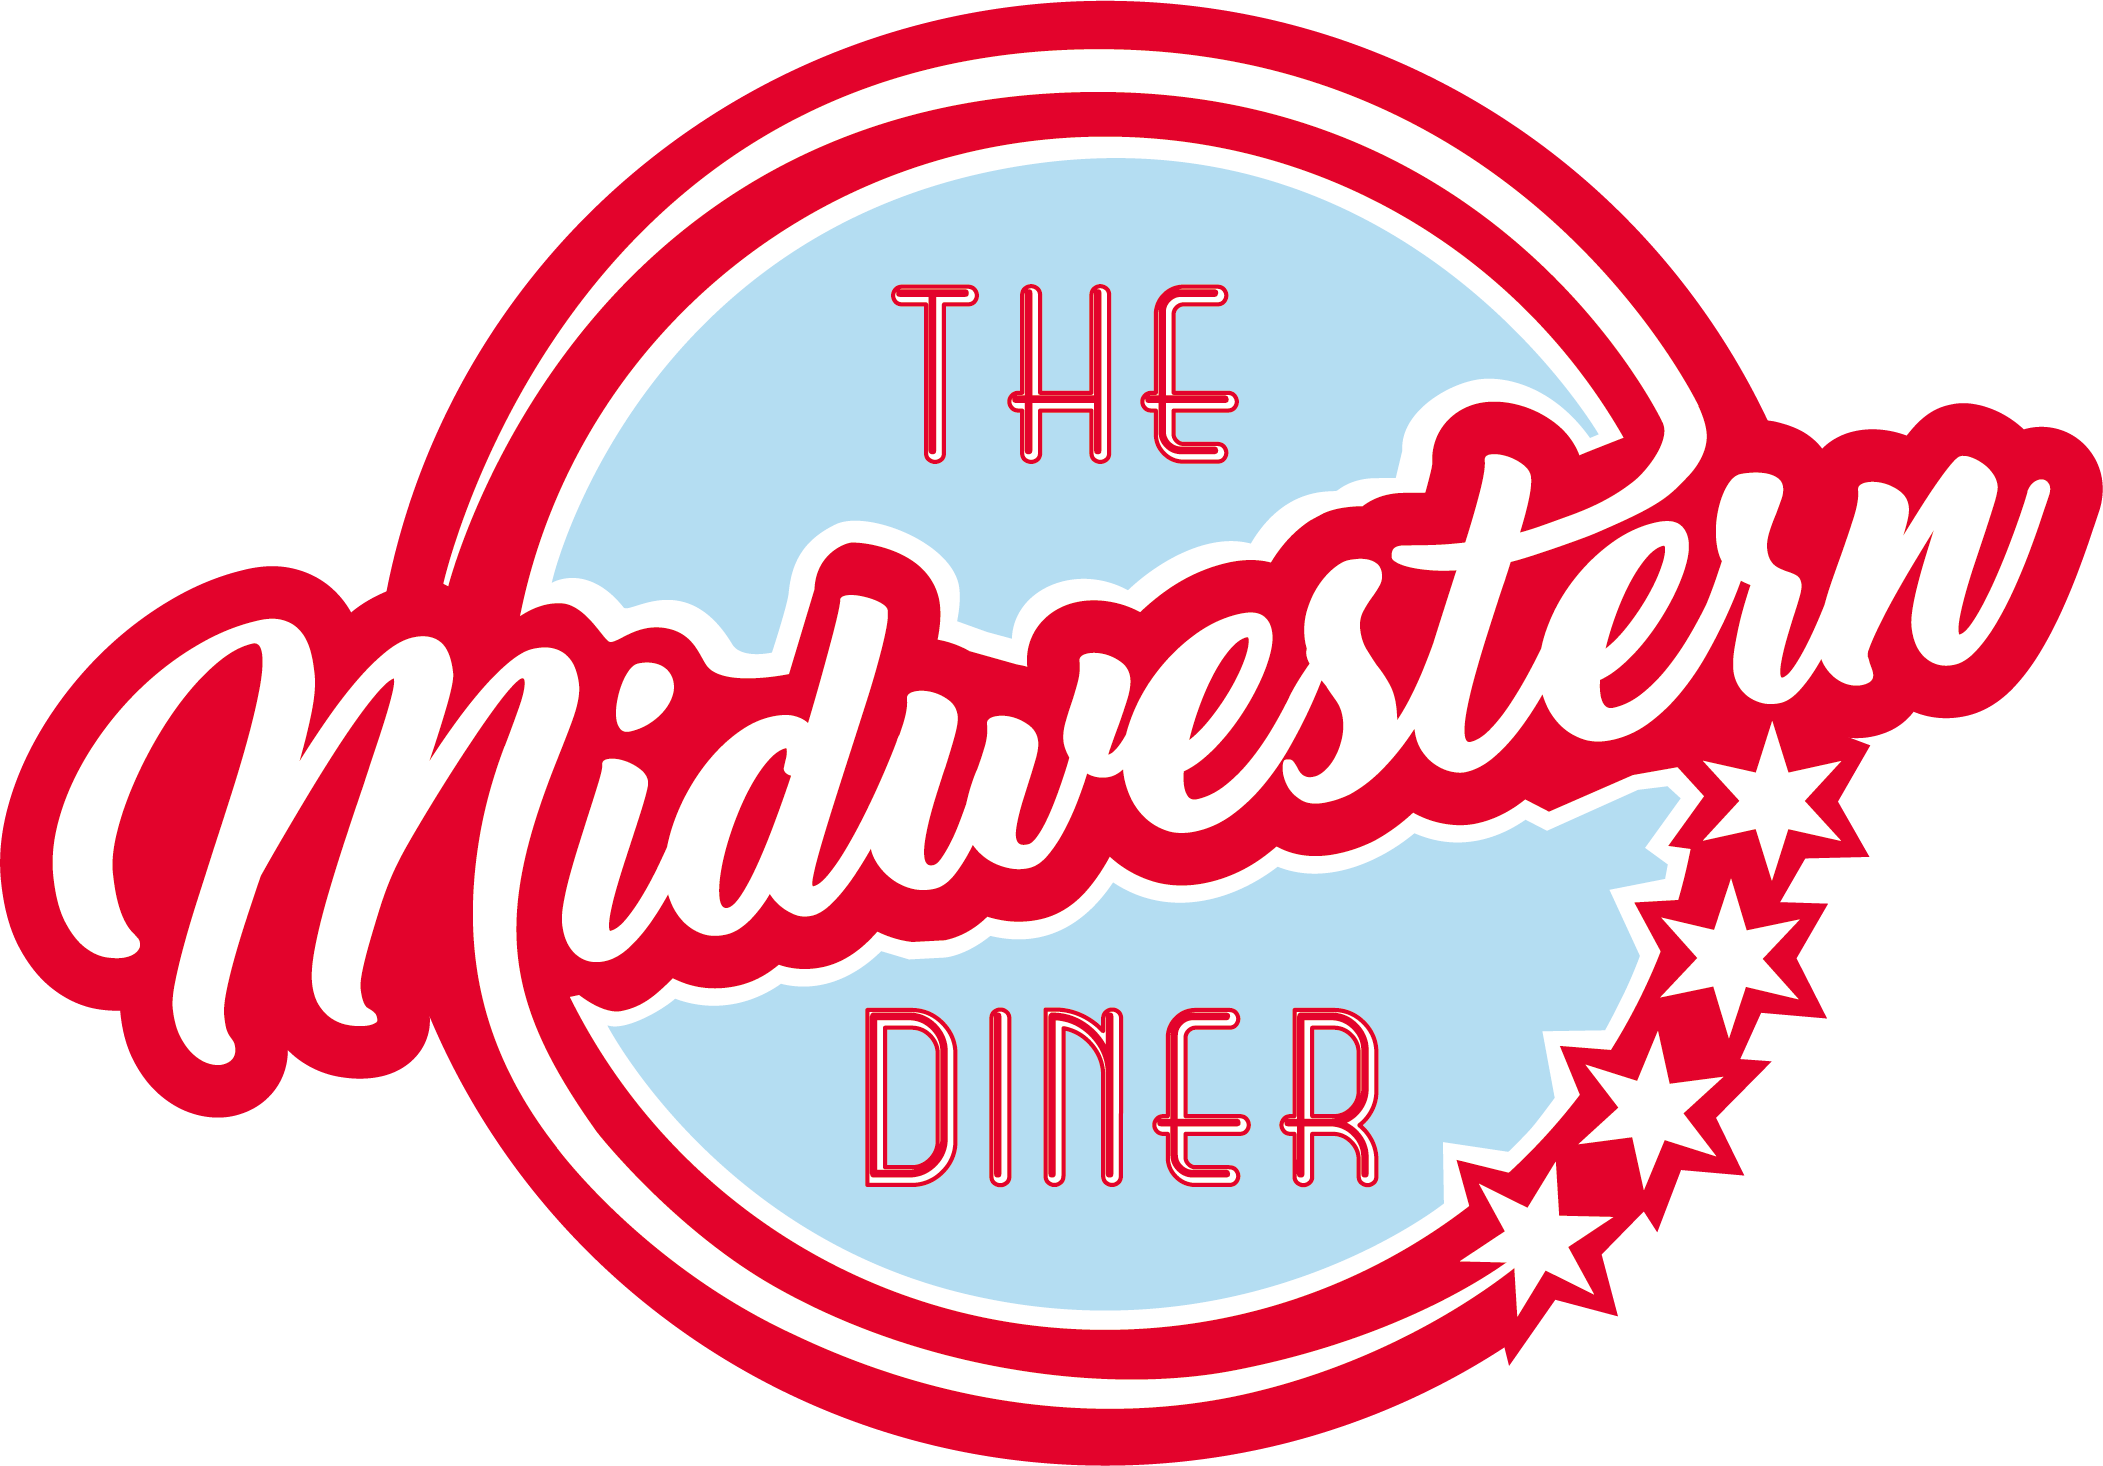 The Midwestern Diner Logo